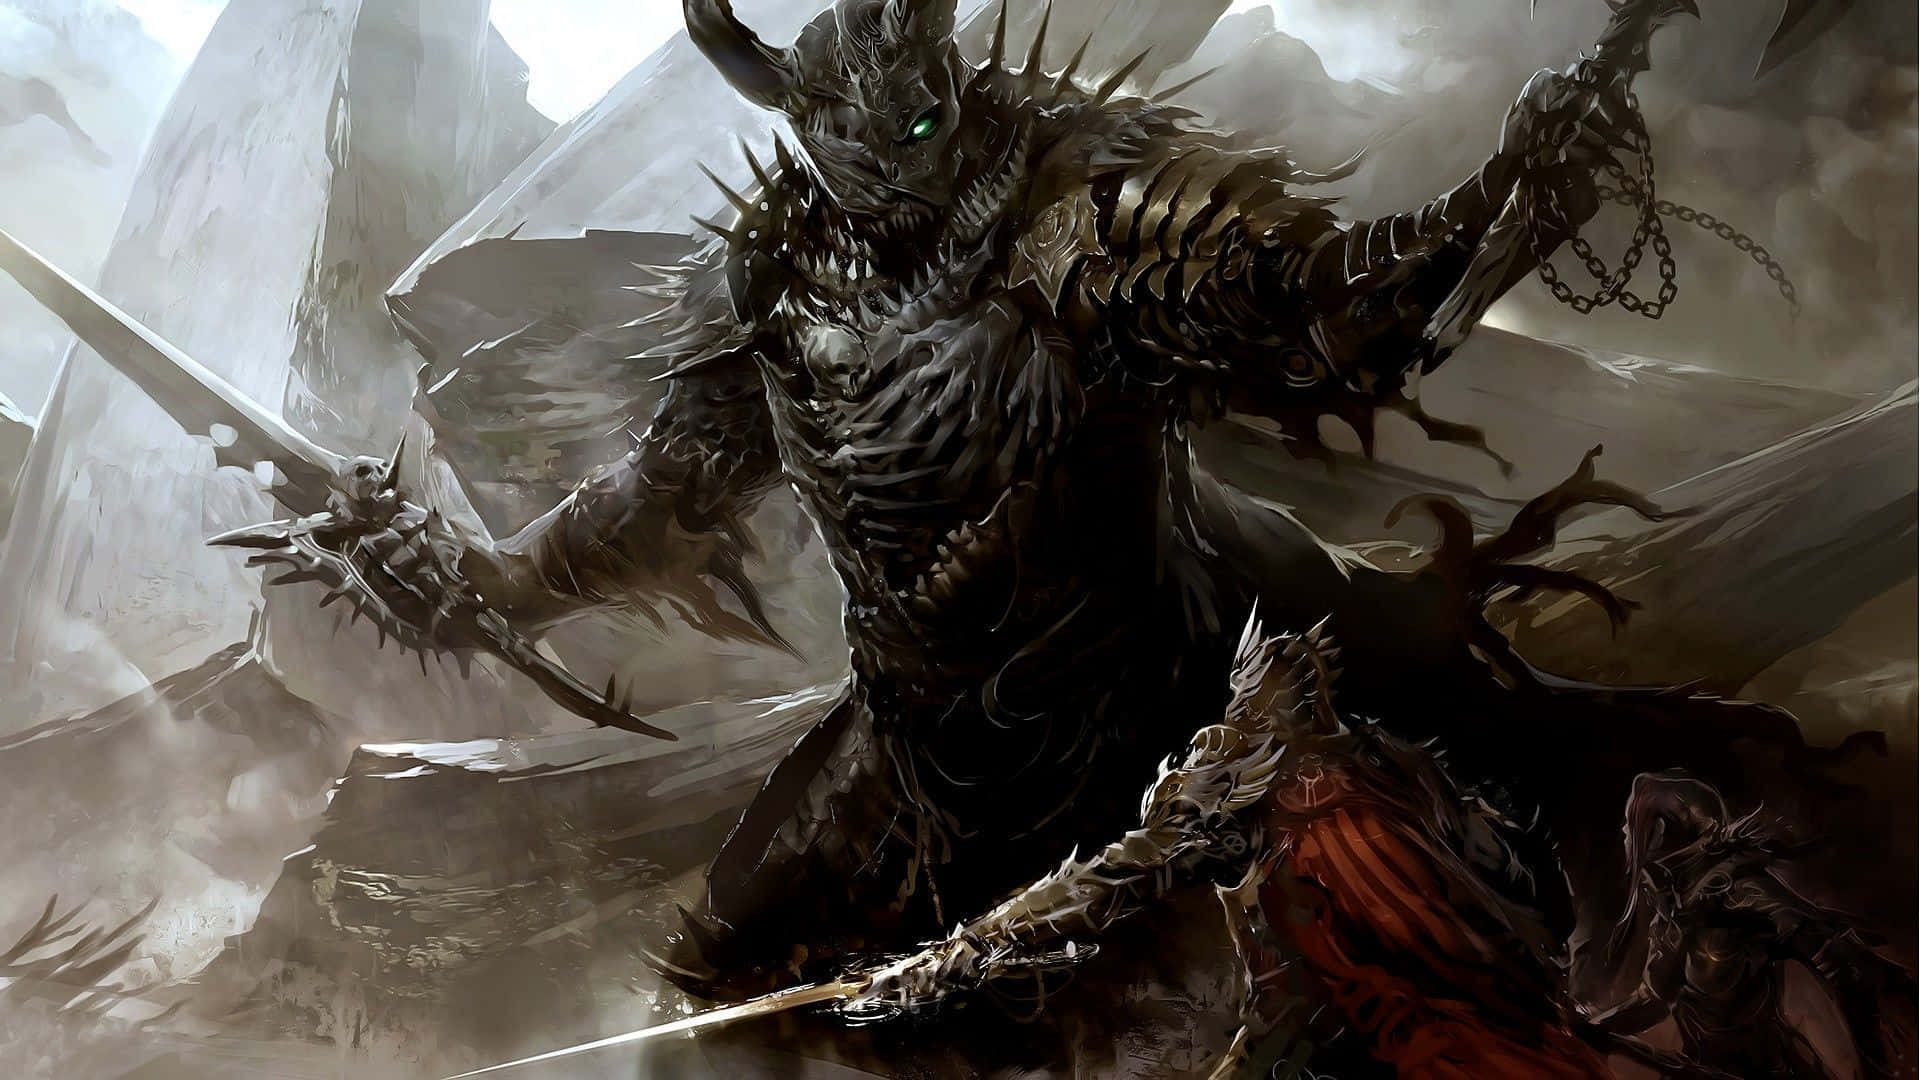 The Daedric Warrior emerges in the mystical world of Skyrim Wallpaper